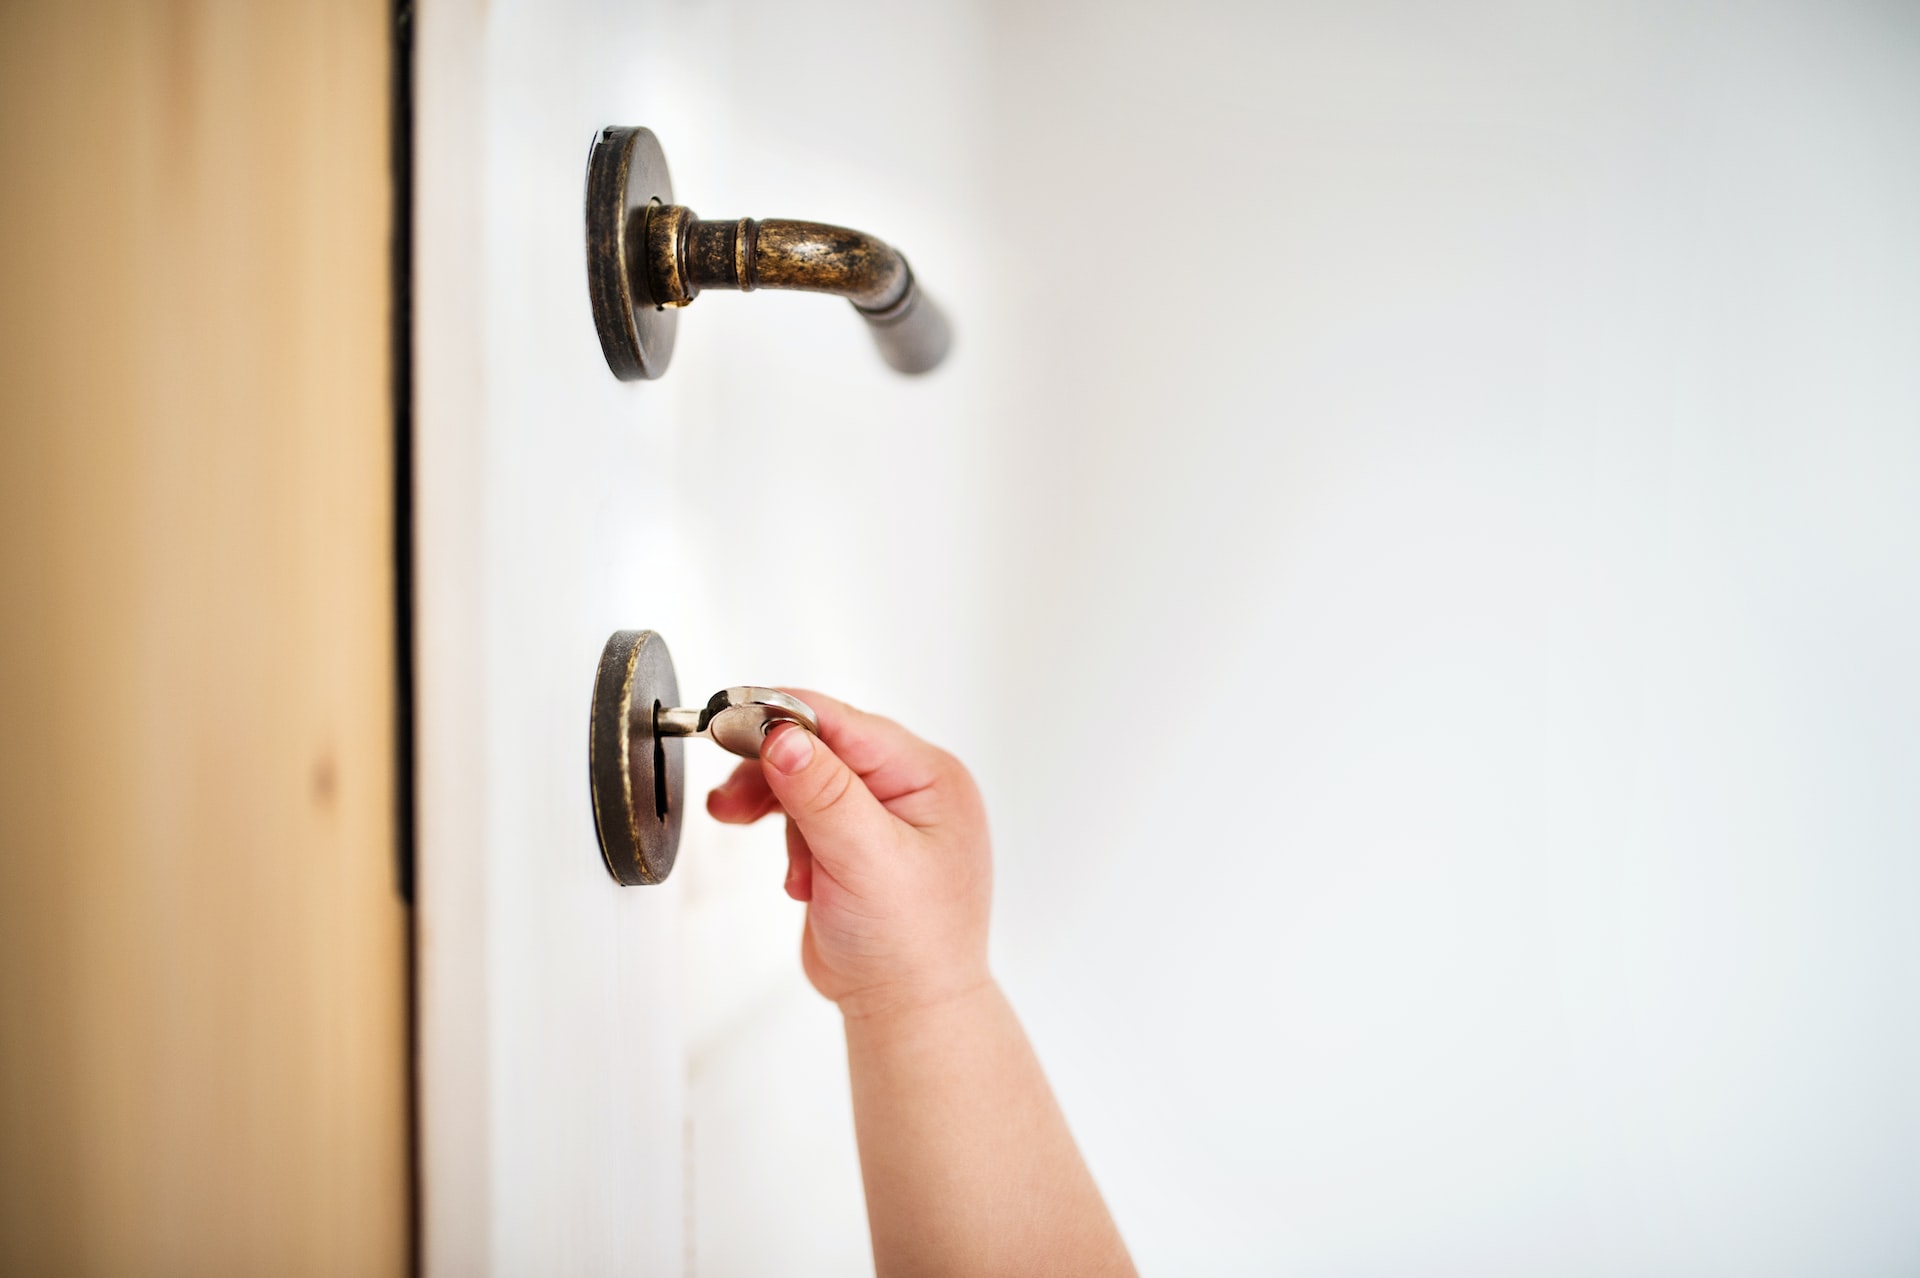 The Best Methods For Removing a Key from a Locked Door